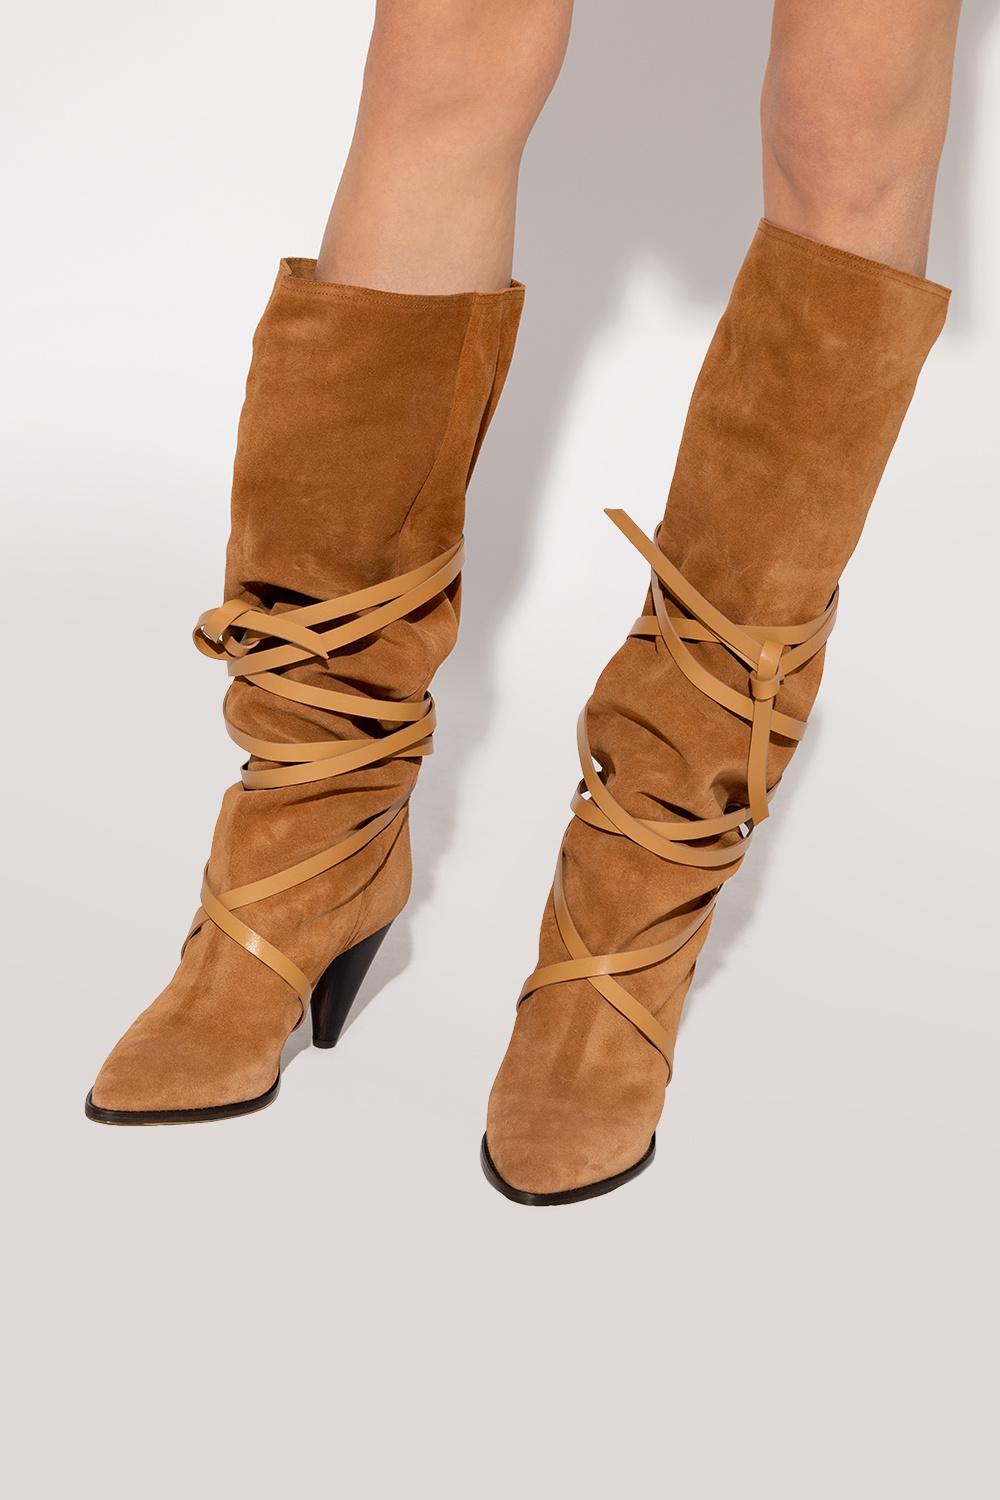 Isabel Marant 'lophie' Suede Heeled Knee-high Boots in Brown | Lyst